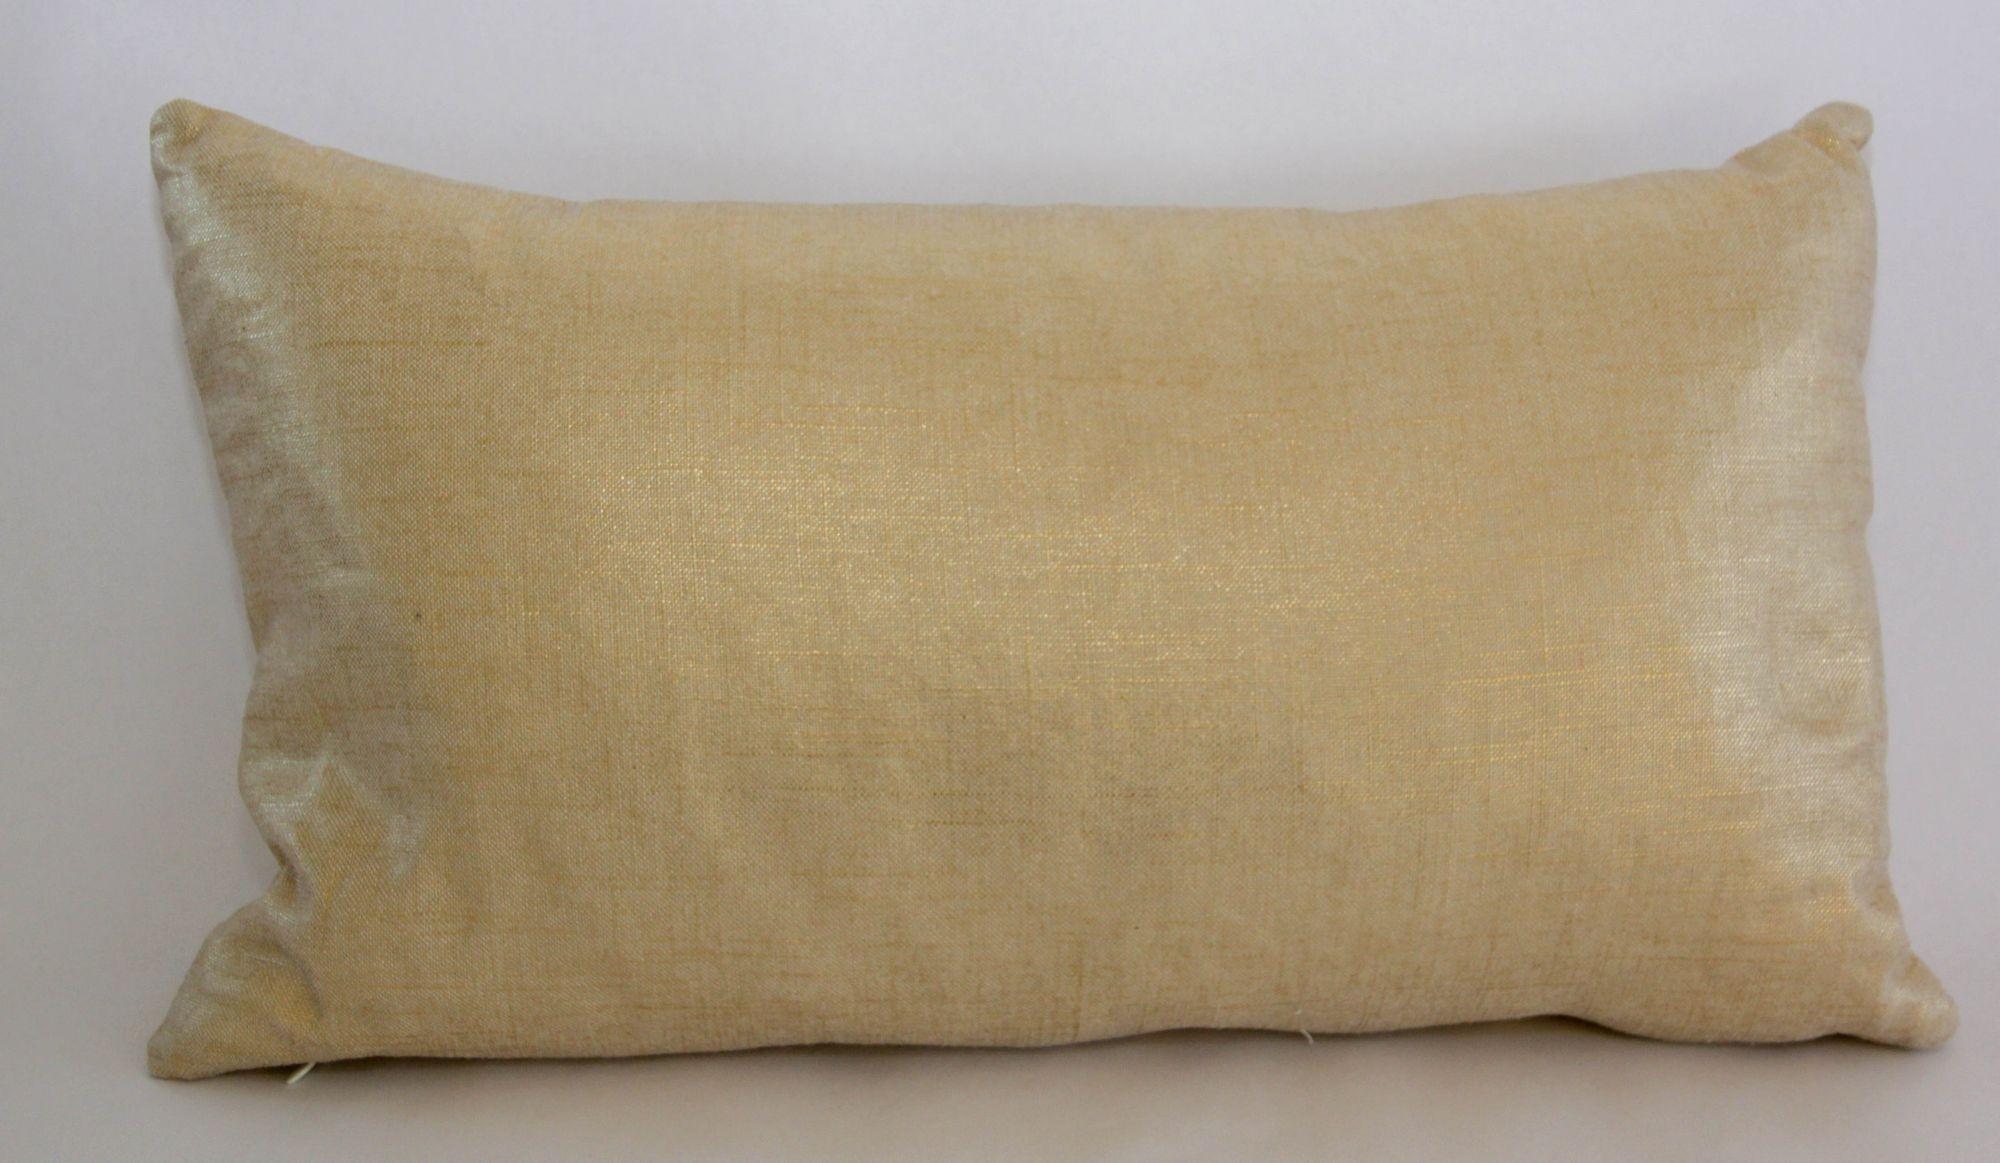 Decorative luxurious lumbar throw pillow in gold shimmer.
This luxurious pillow with a glamorous sheen will shine, depending on how the light hits it, this cushion displays many shimmering hues of gold.
This exquisite throw pillow will transform